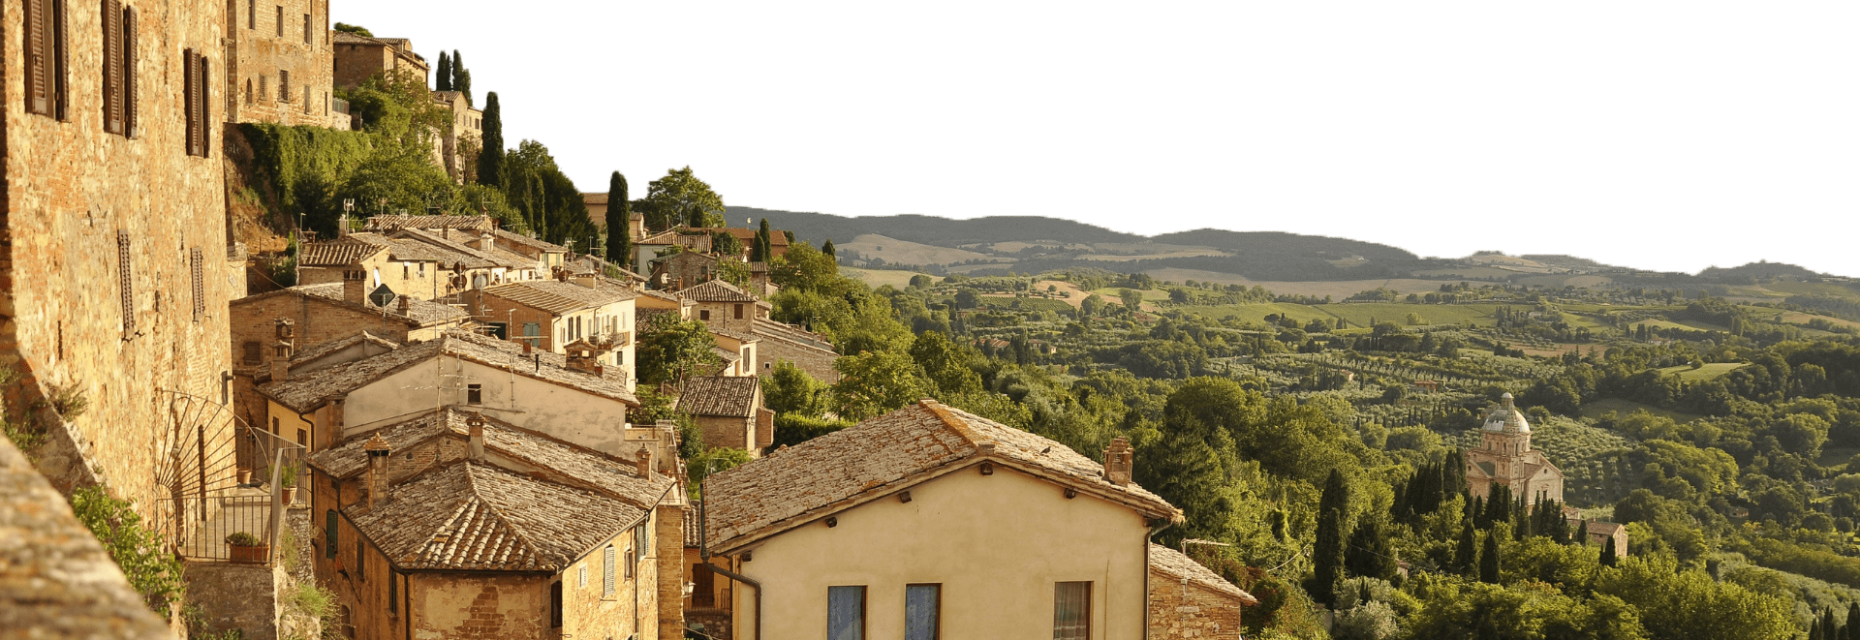 A beautiful view of village in Tuscany, a fantastic destination for a weekend break to Italy